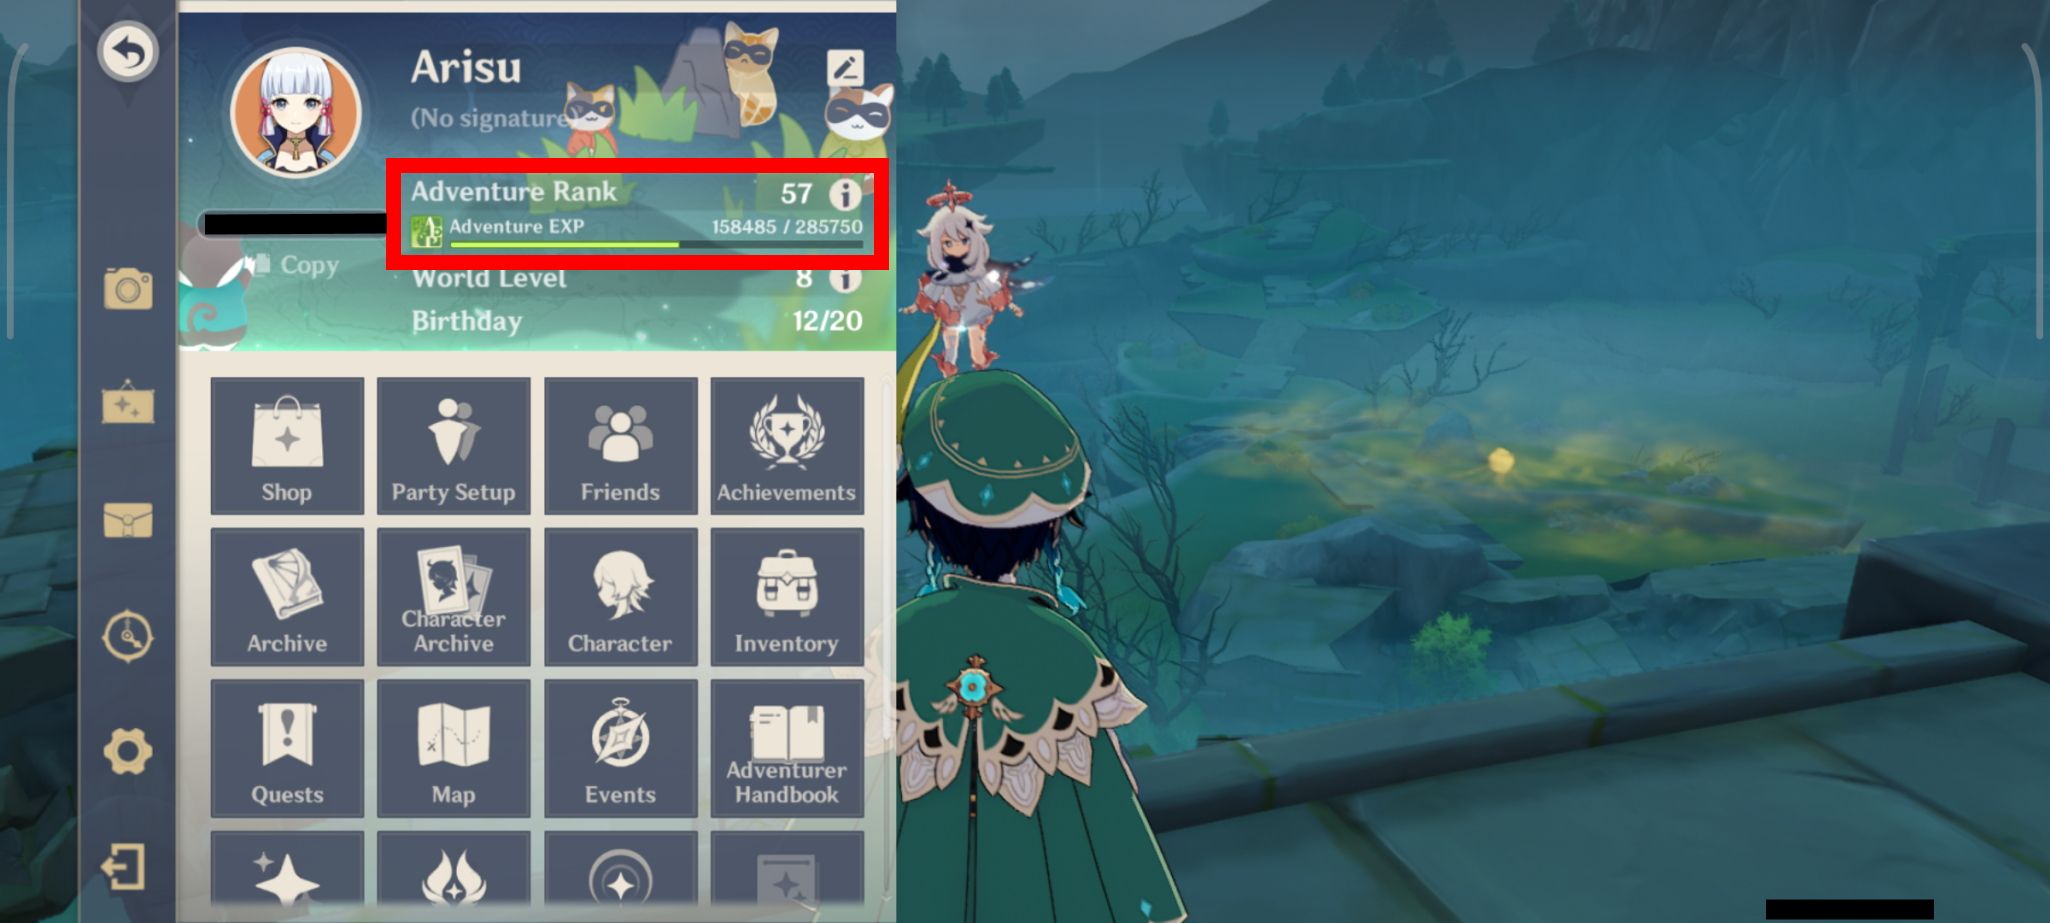 red rectangle outline over adventure rank 